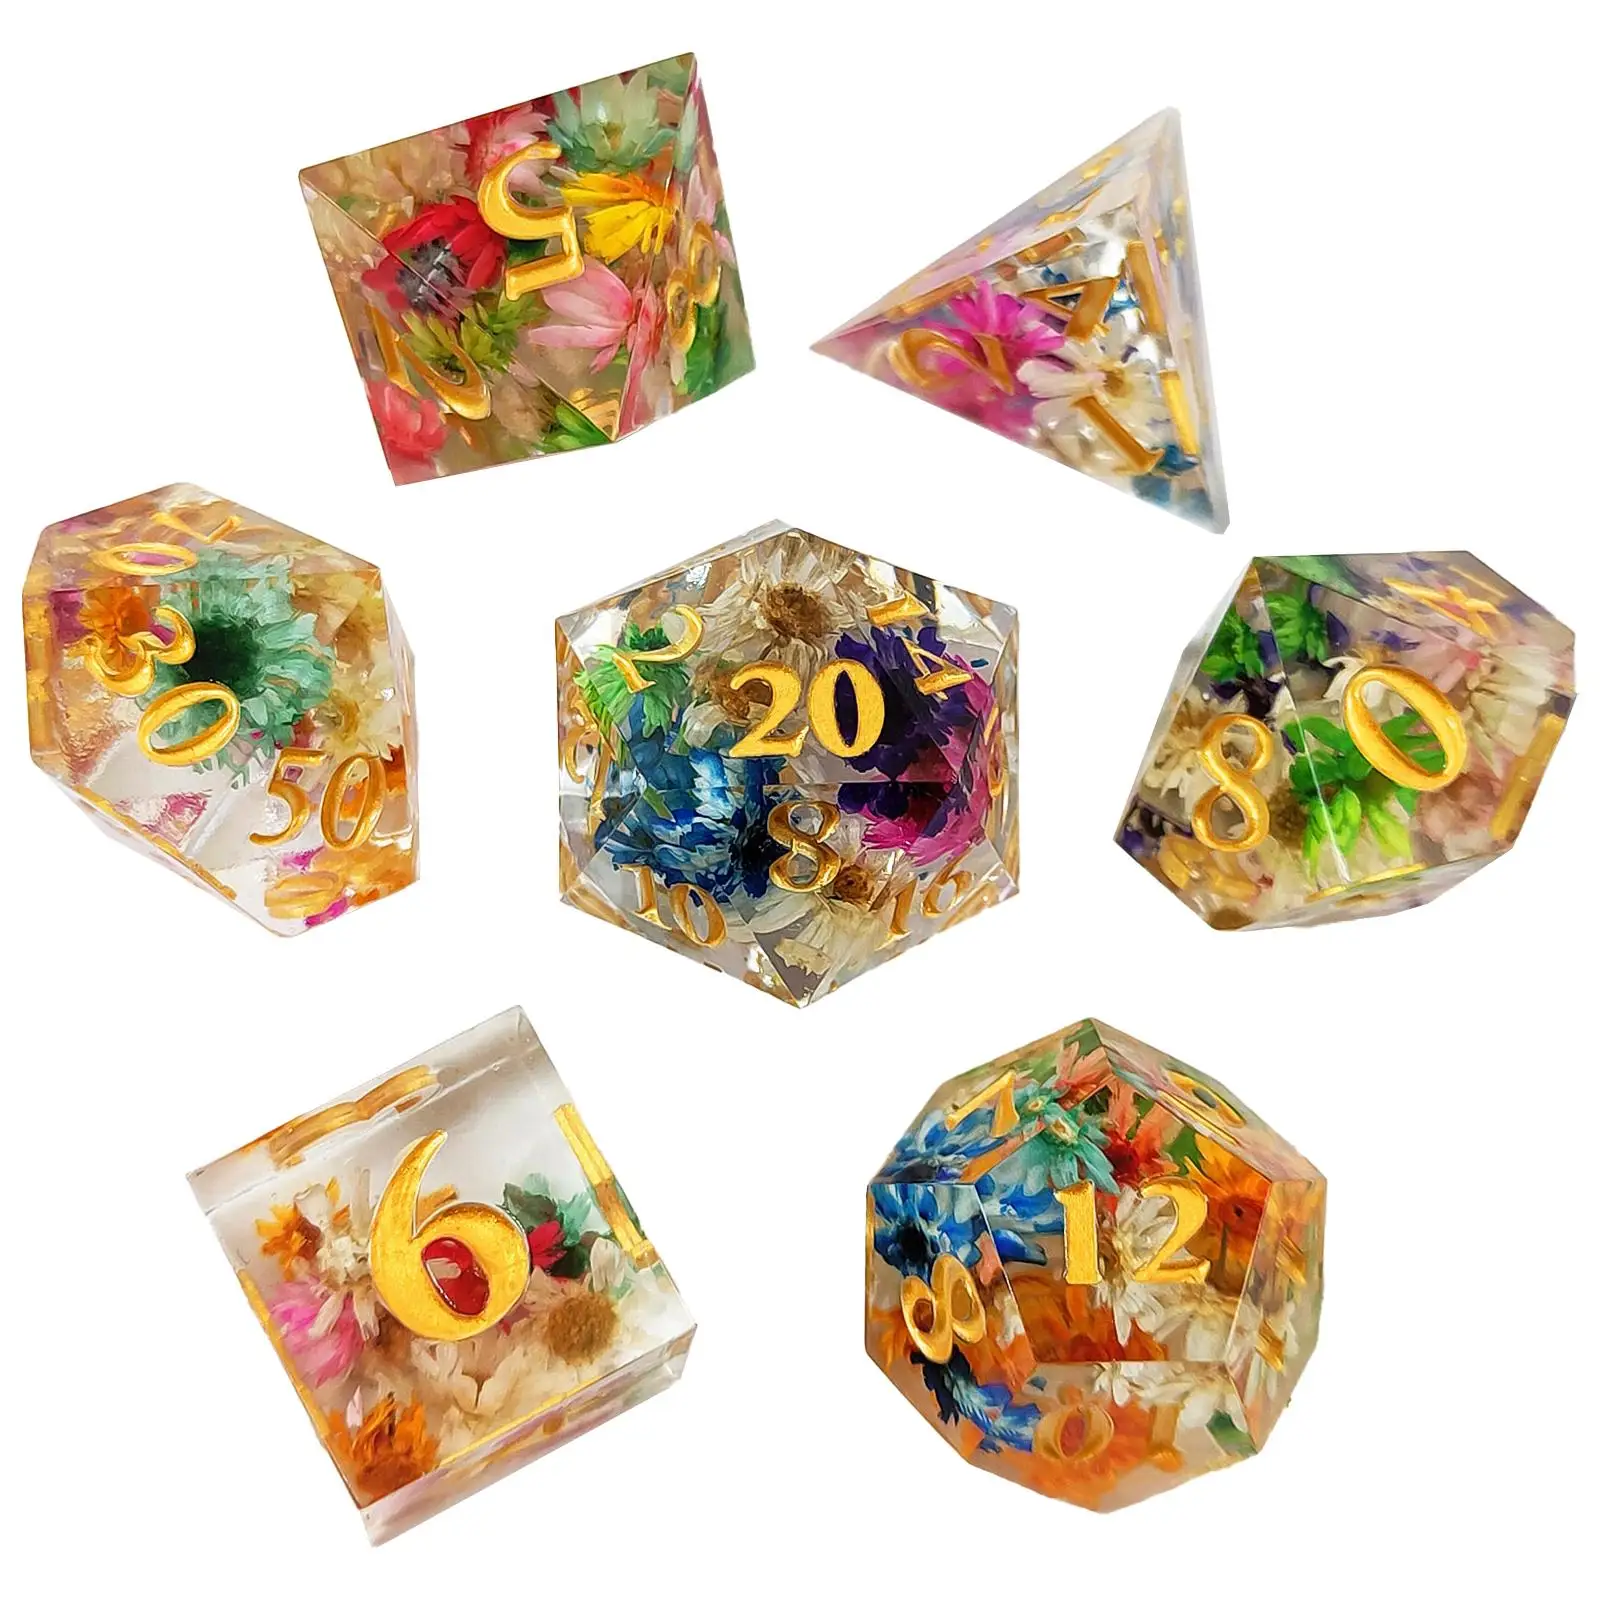 7x Polyhedral Dices Set Transparent Flower Engraved Game Dices for Parties